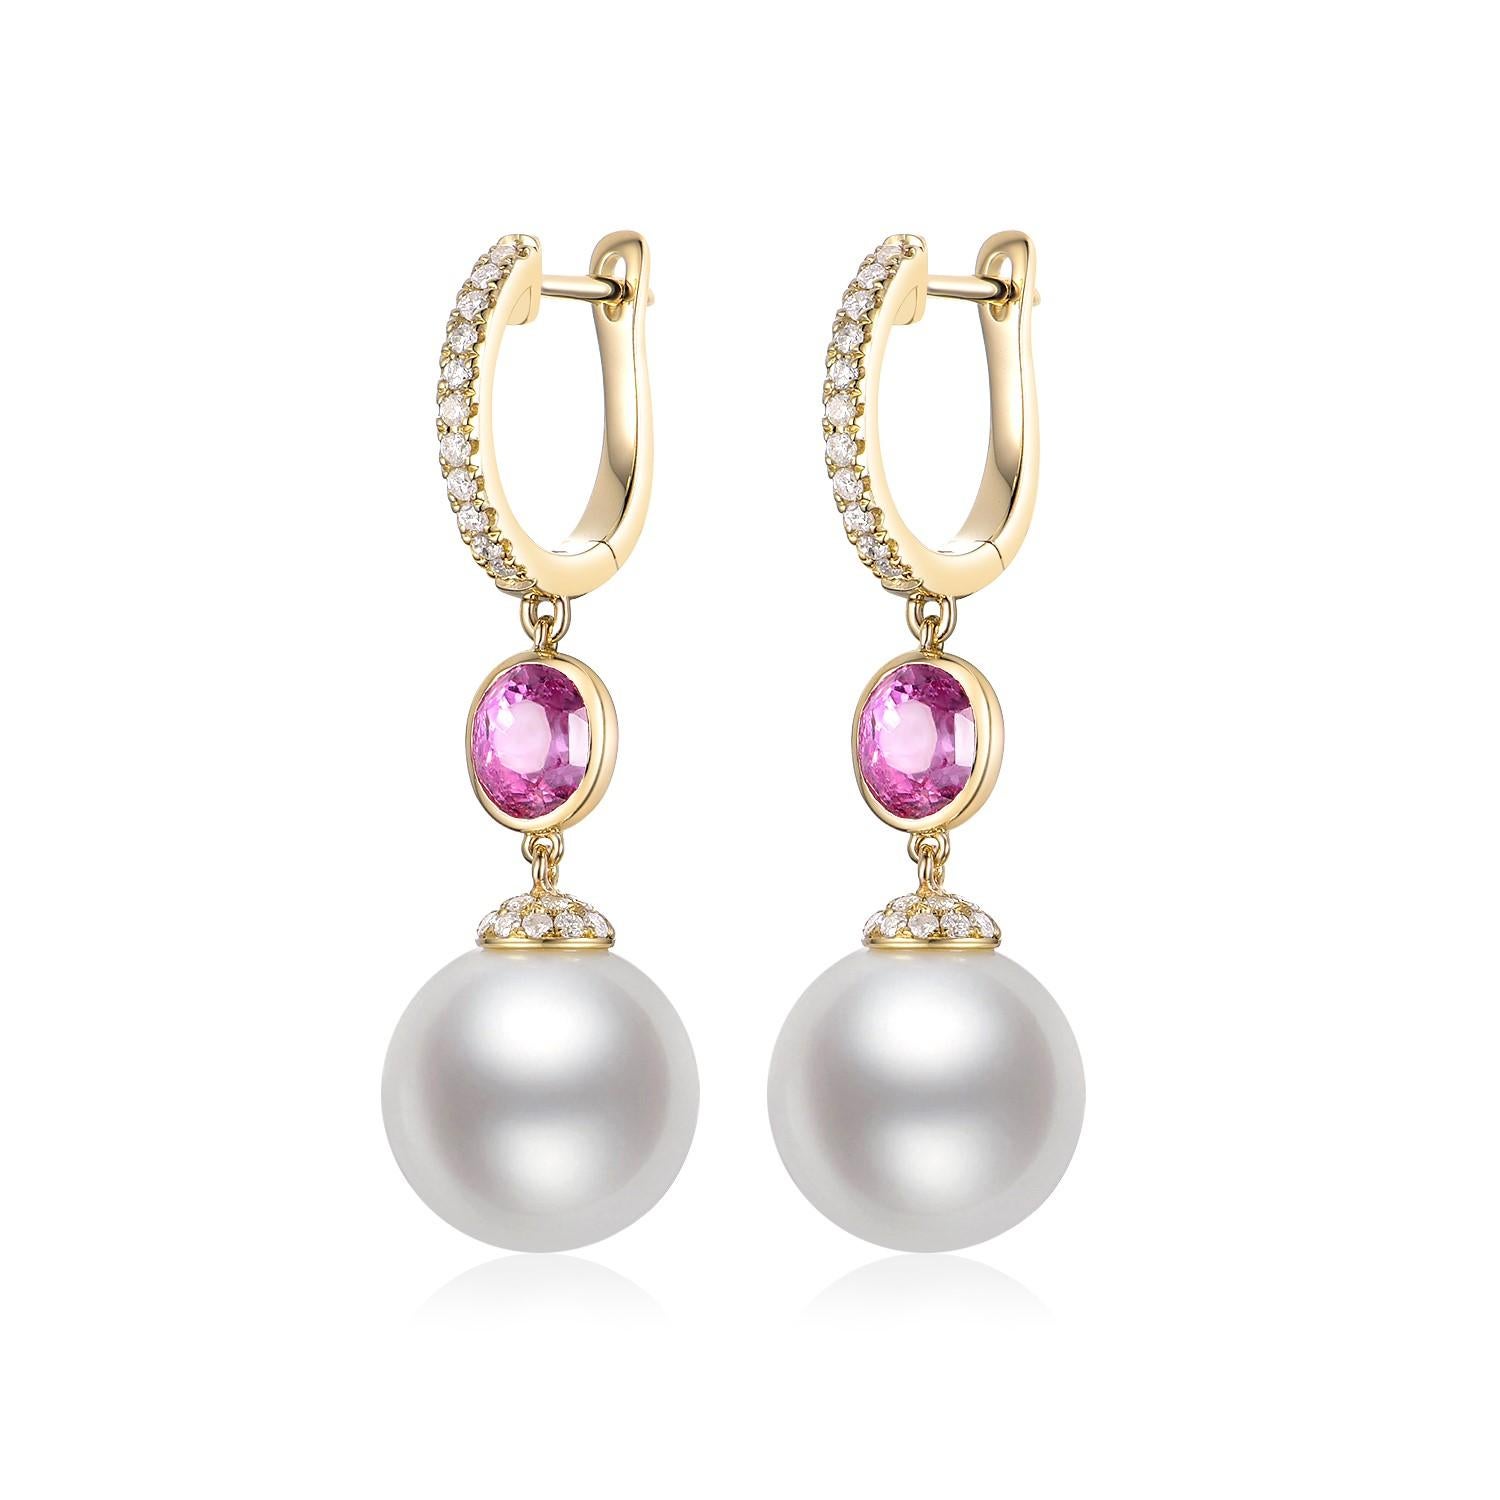 These exquisite dangle earrings feature the classic elegance of South Sea pearls combined with the vibrant allure of pink sapphires and the timeless sparkle of diamonds, all set in warm 14-karat yellow gold. The design begins with a hoop, delicately